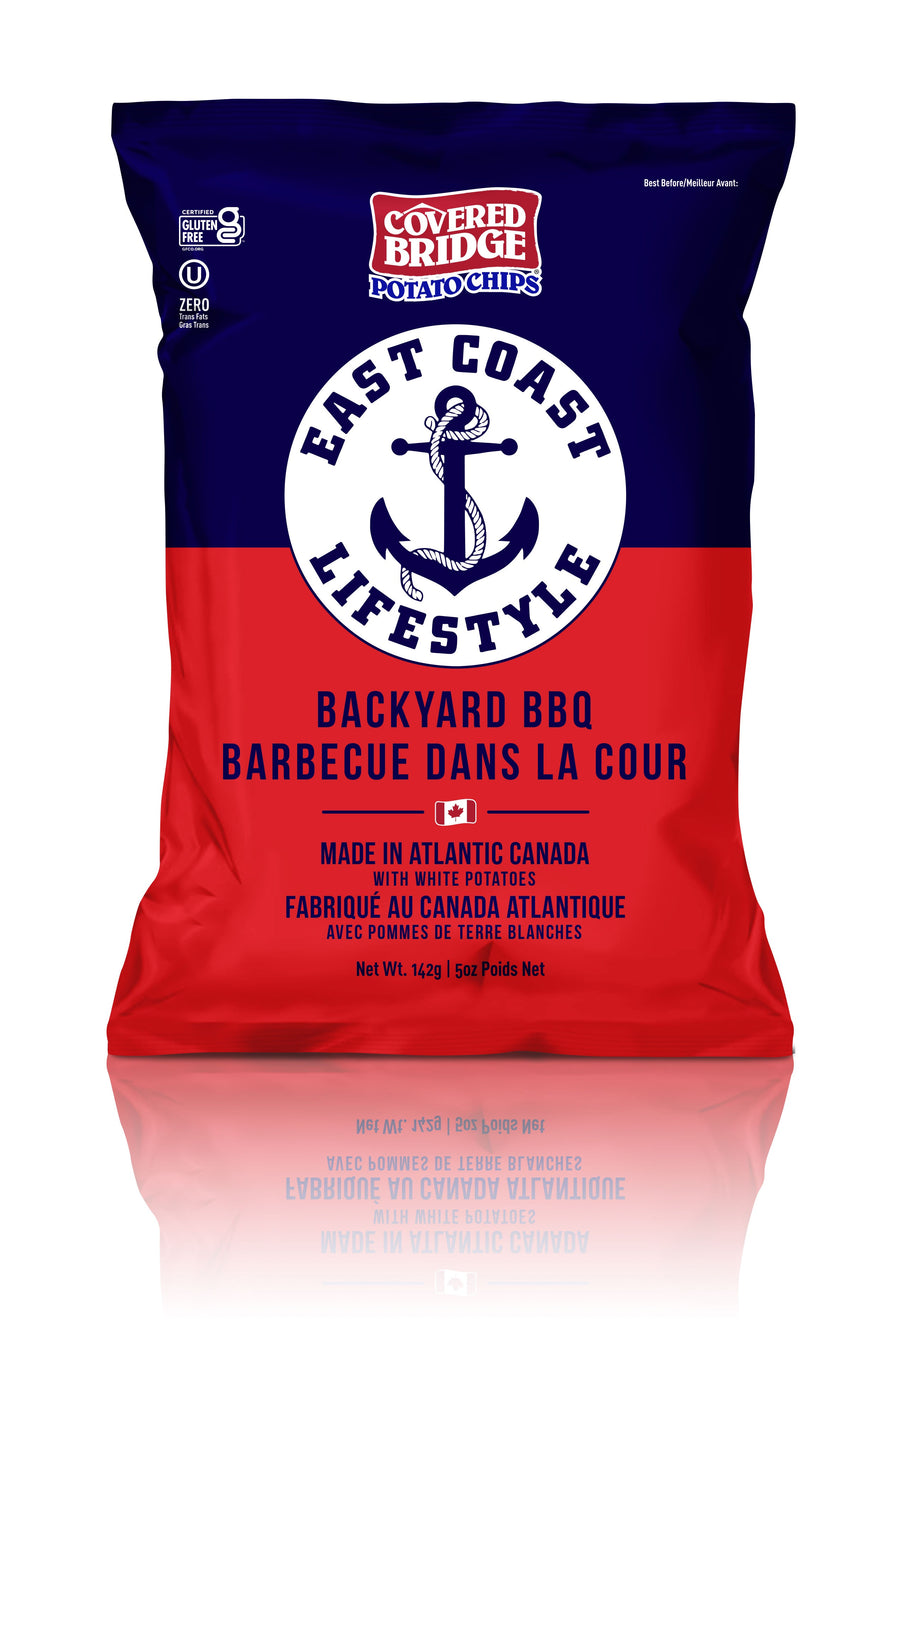 Covered Bridge Chips – ECL Backyard BBQ – Gluten Free, Kosher, Kettle Cooked with Dark Russet Potatoes – Made in Canada